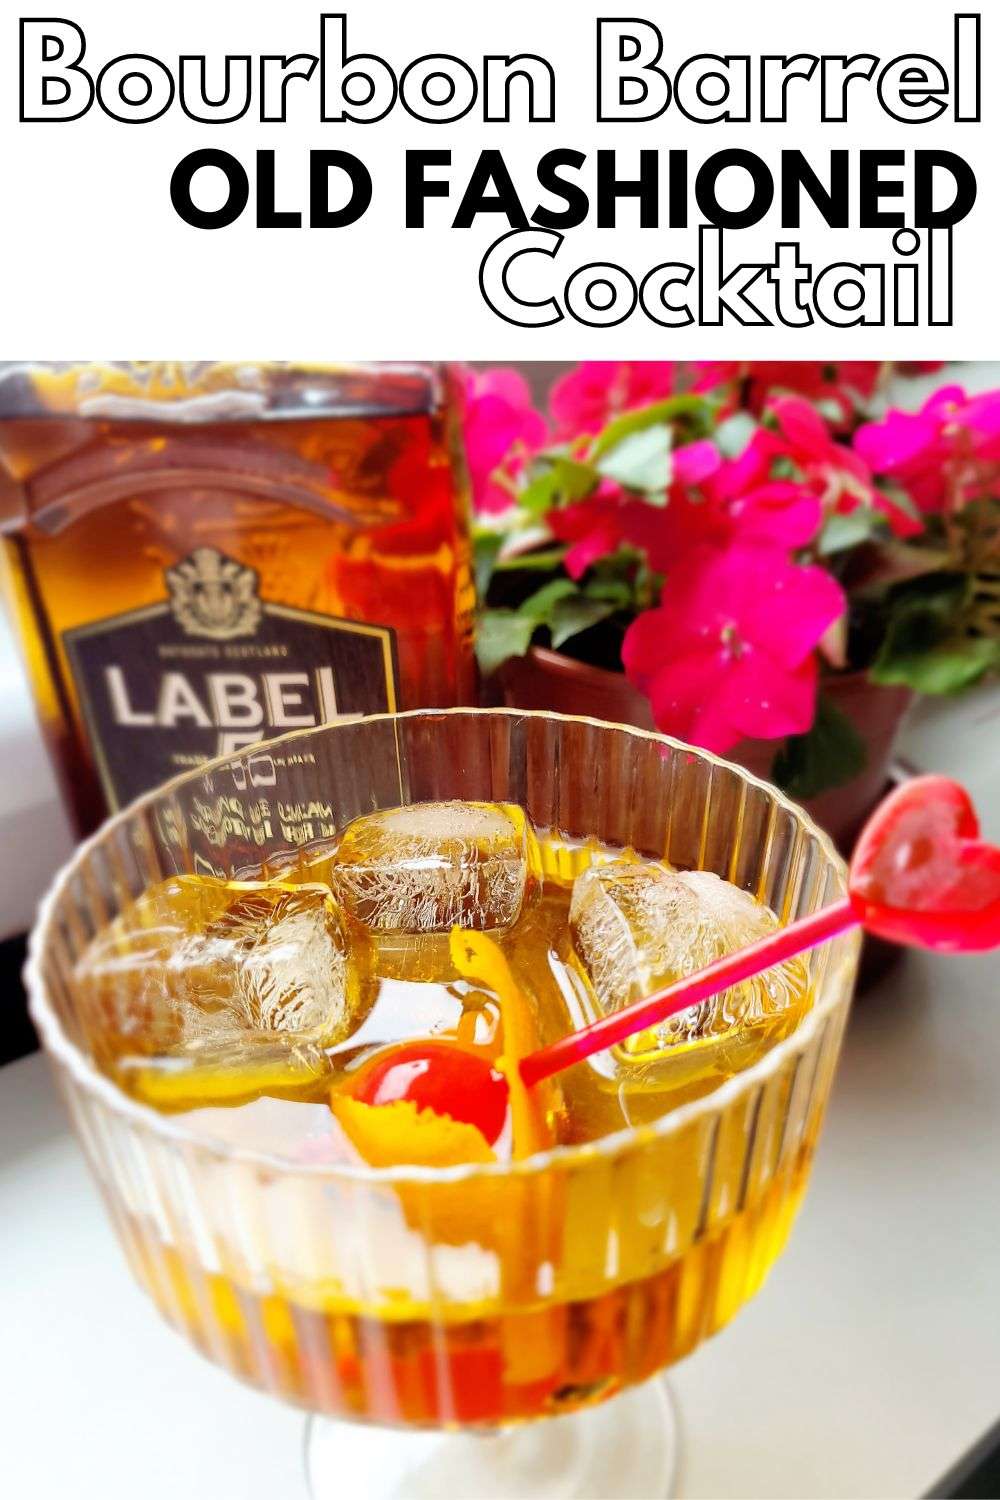 label 5 old fashioned cocktail